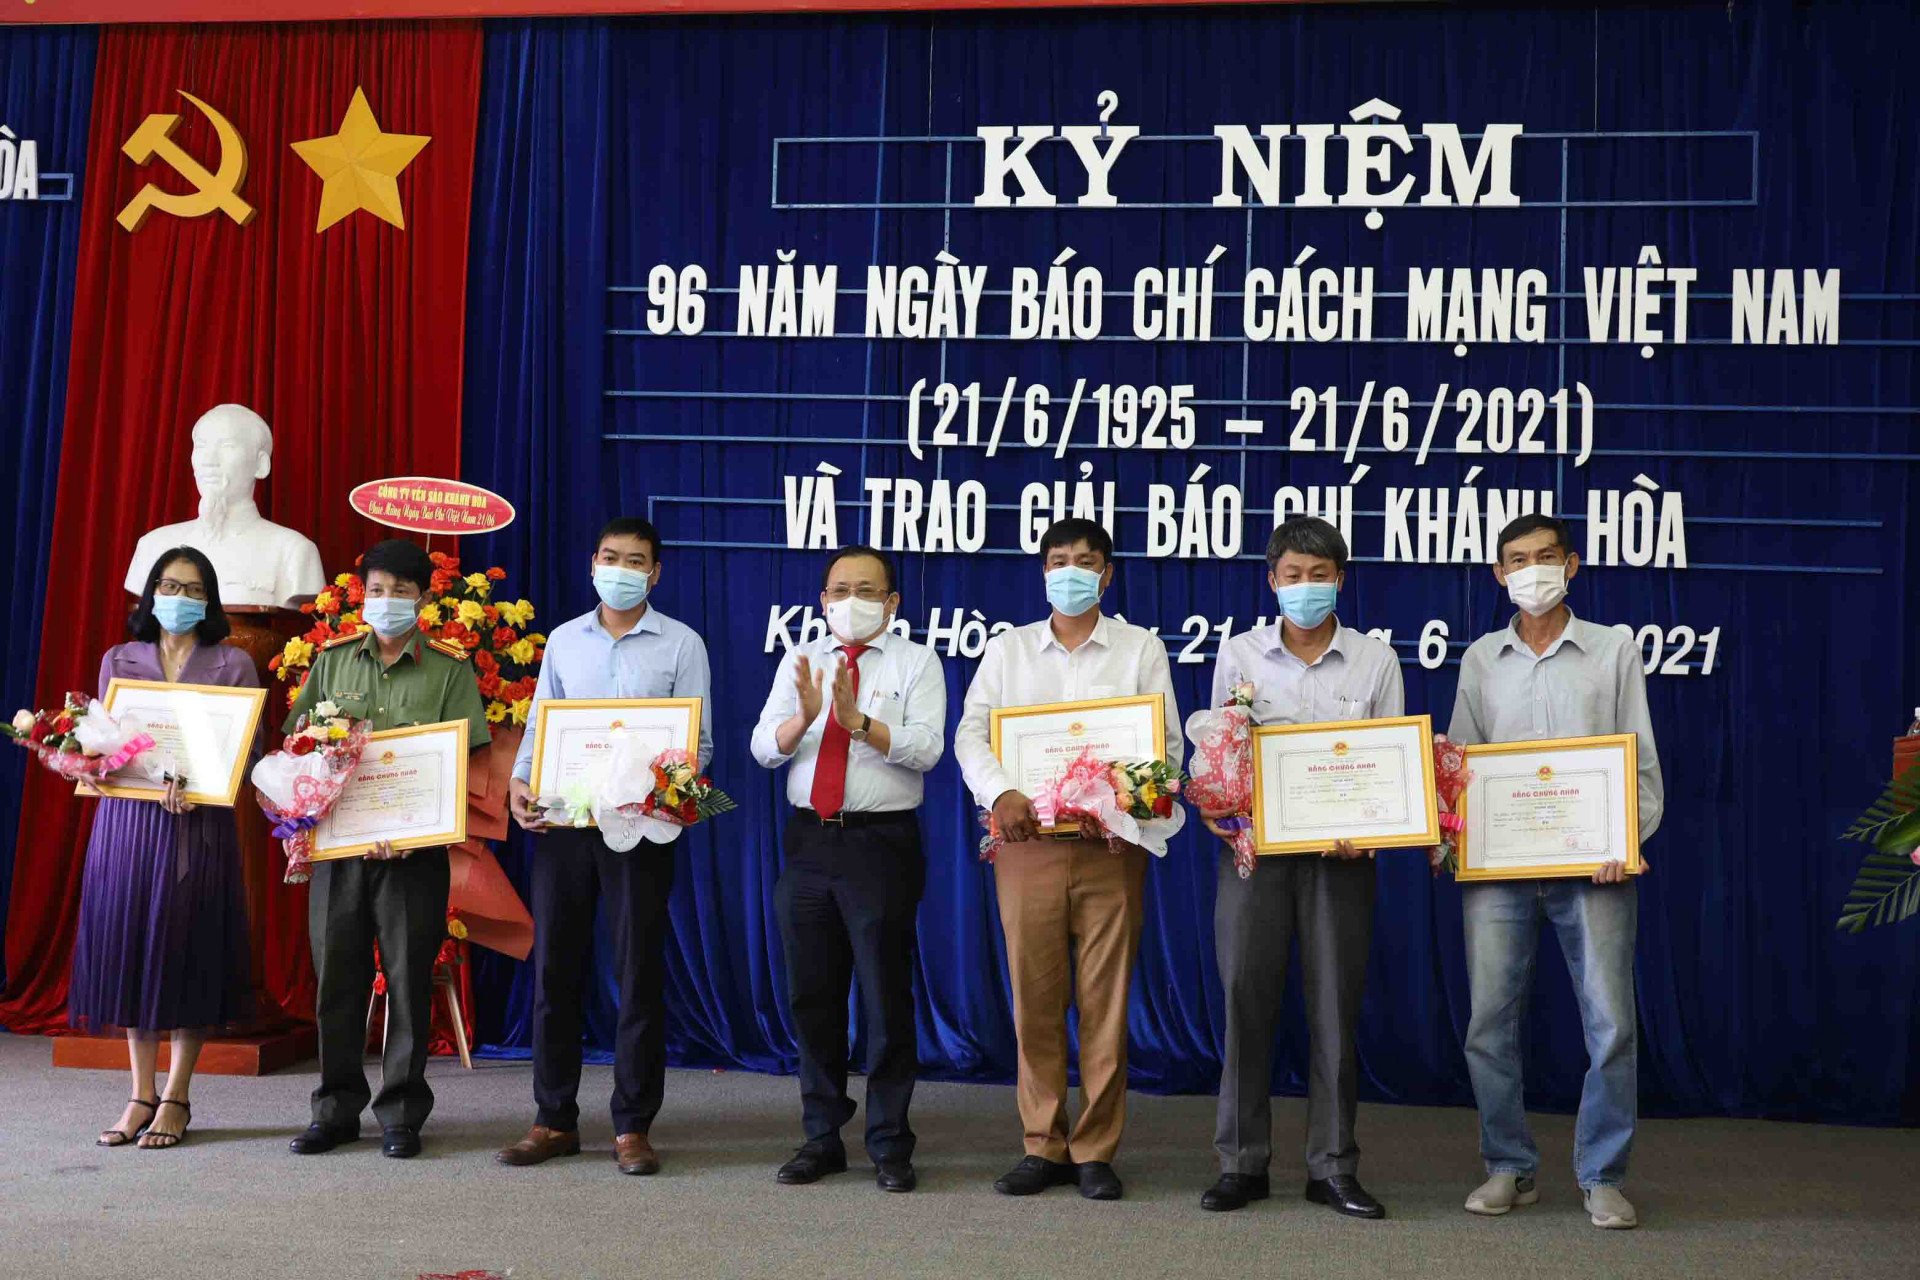 Le Huu Hoang presenting prizes to third-prize winners